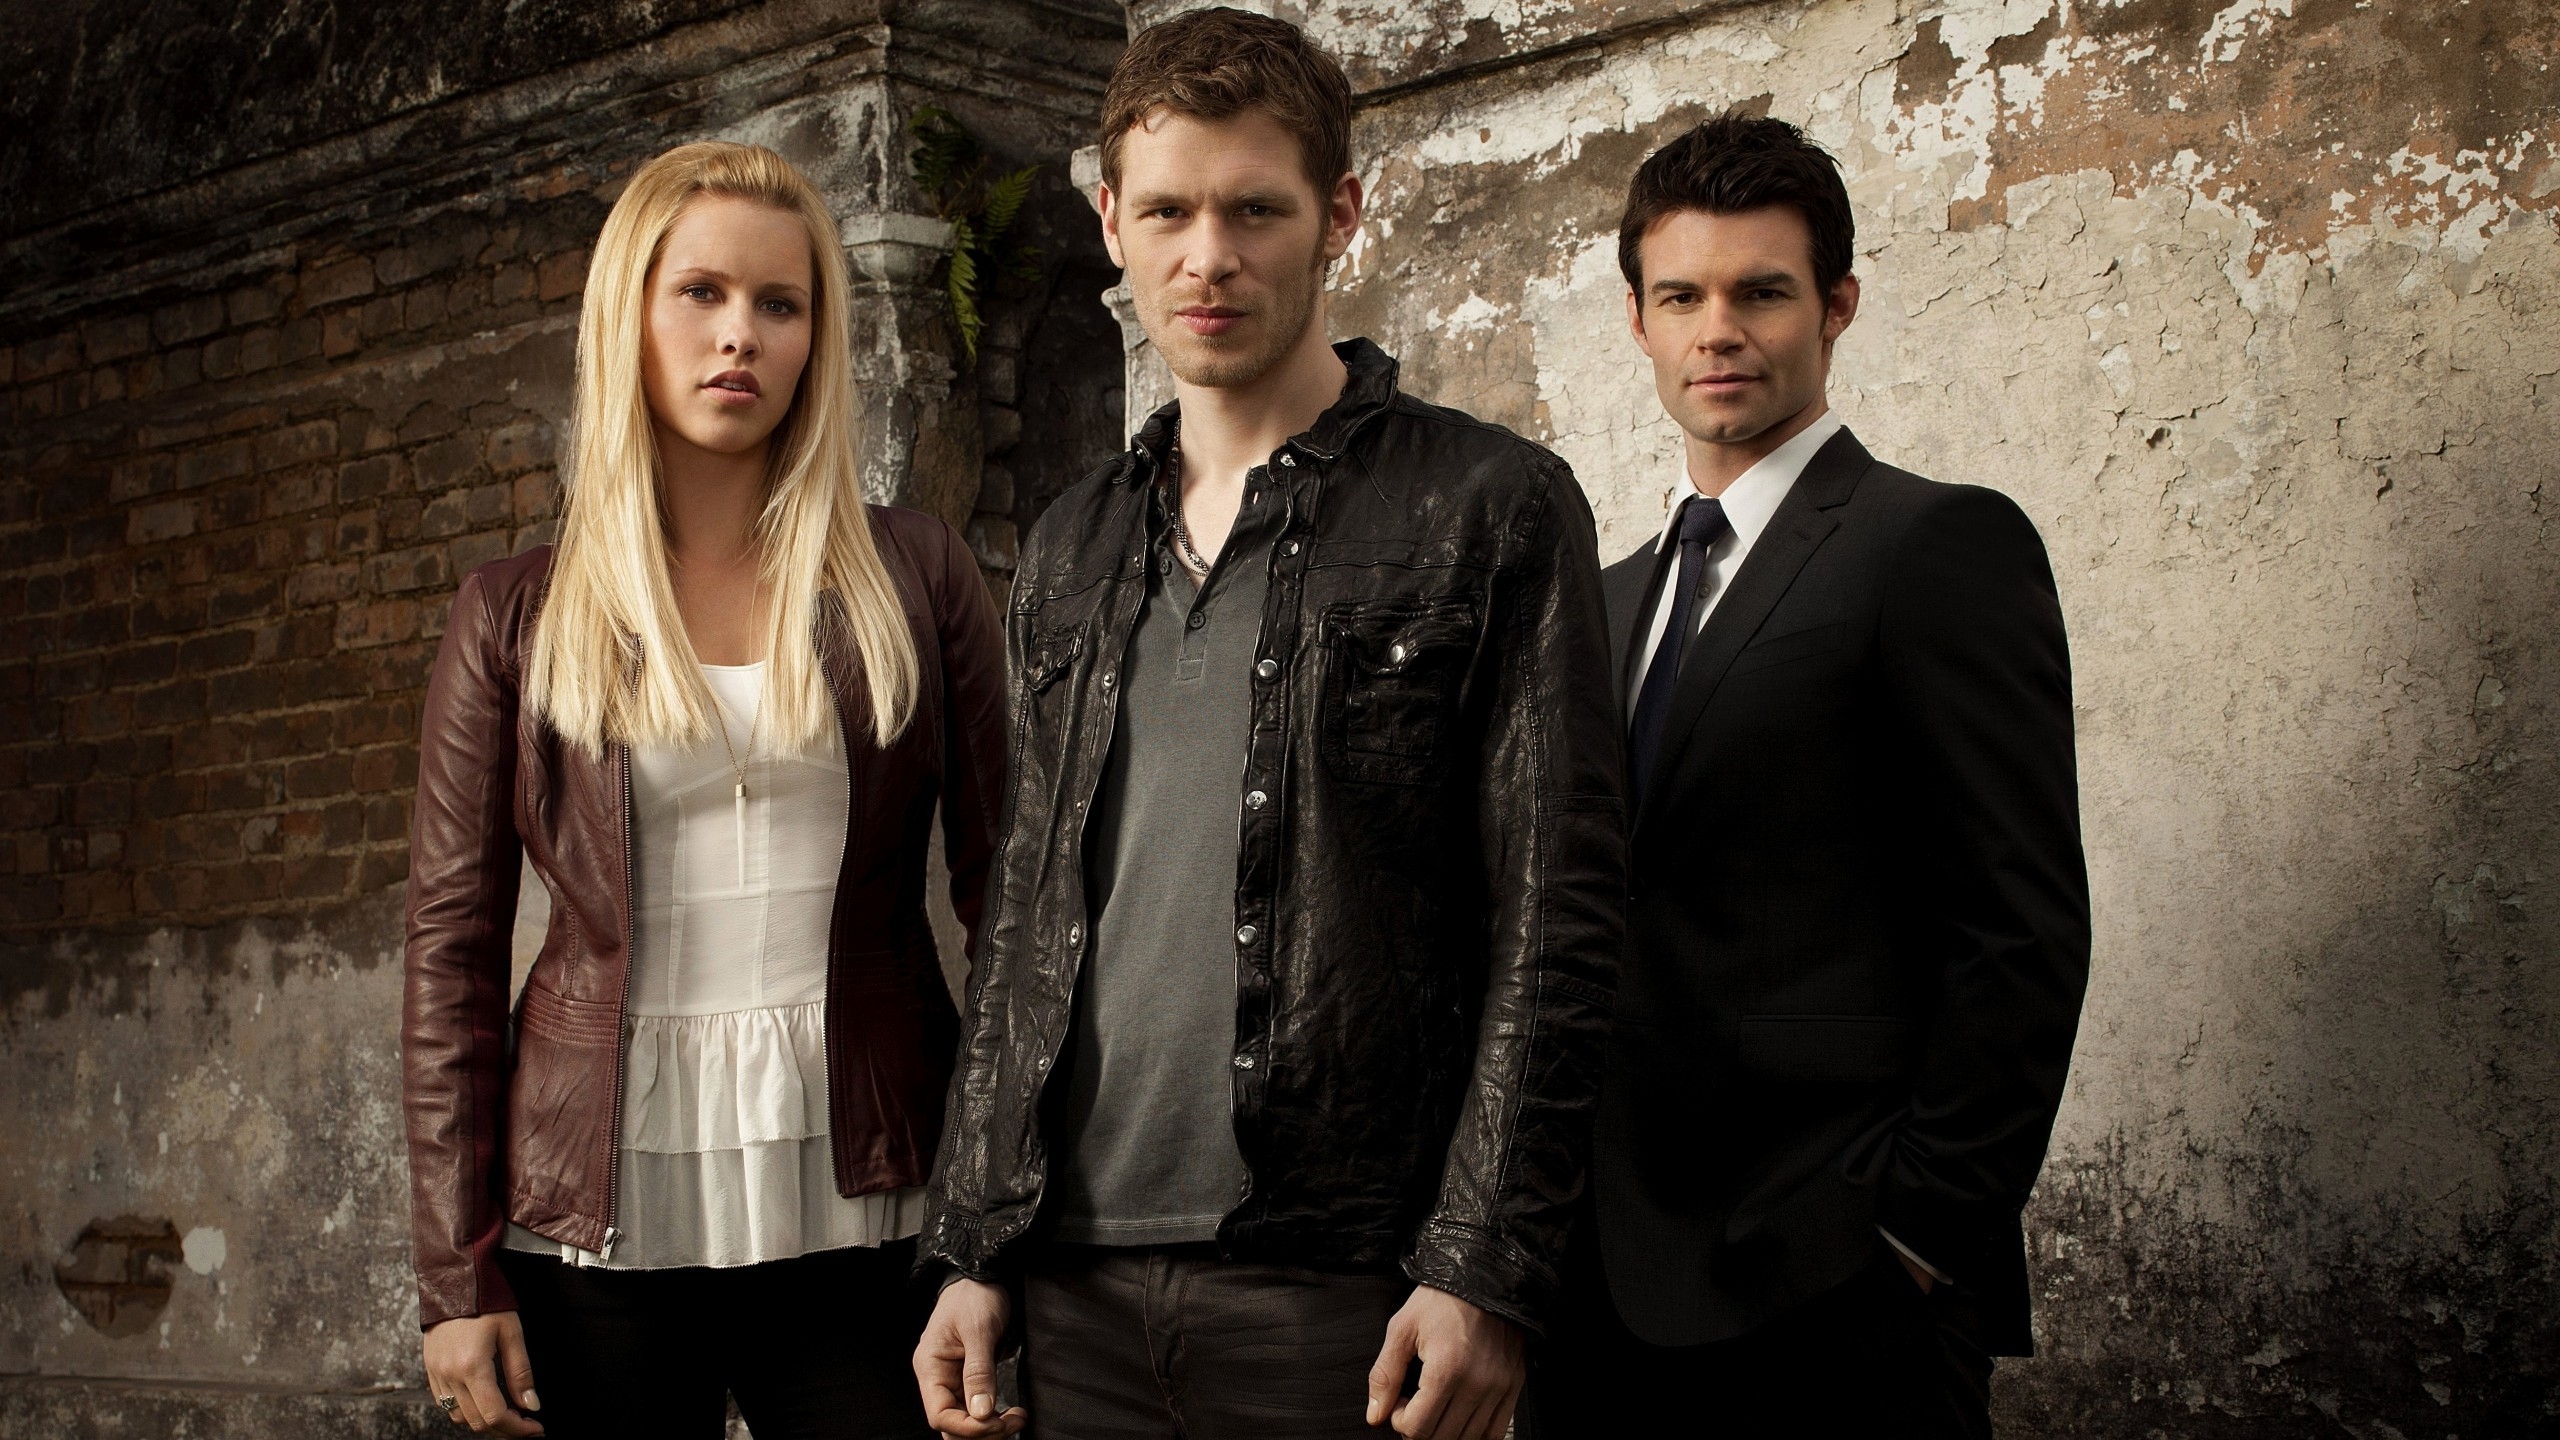 The Originals Poster for 2560x1440 HDTV resolution